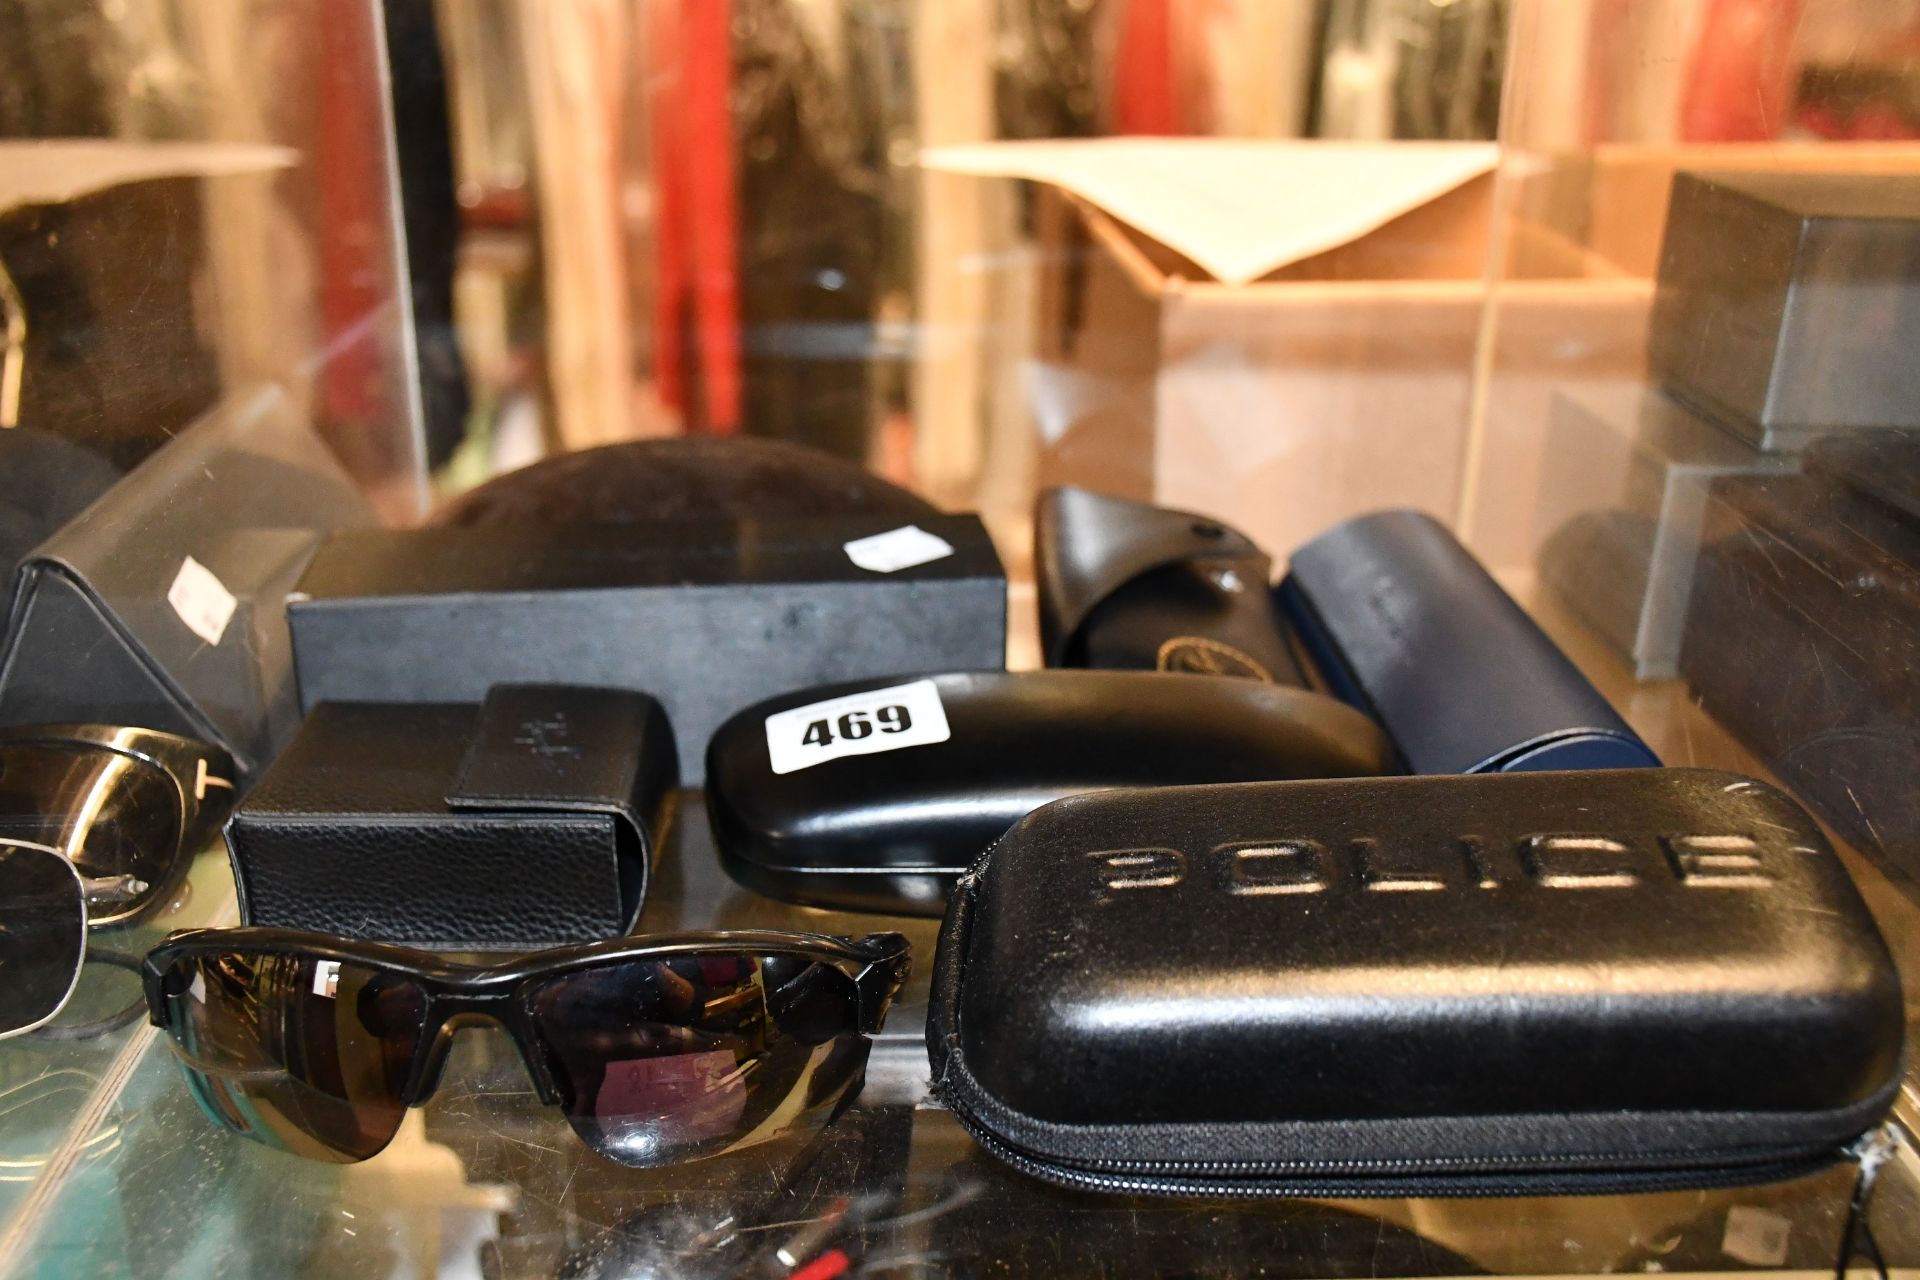 Eight pairs of branded sunglasses.